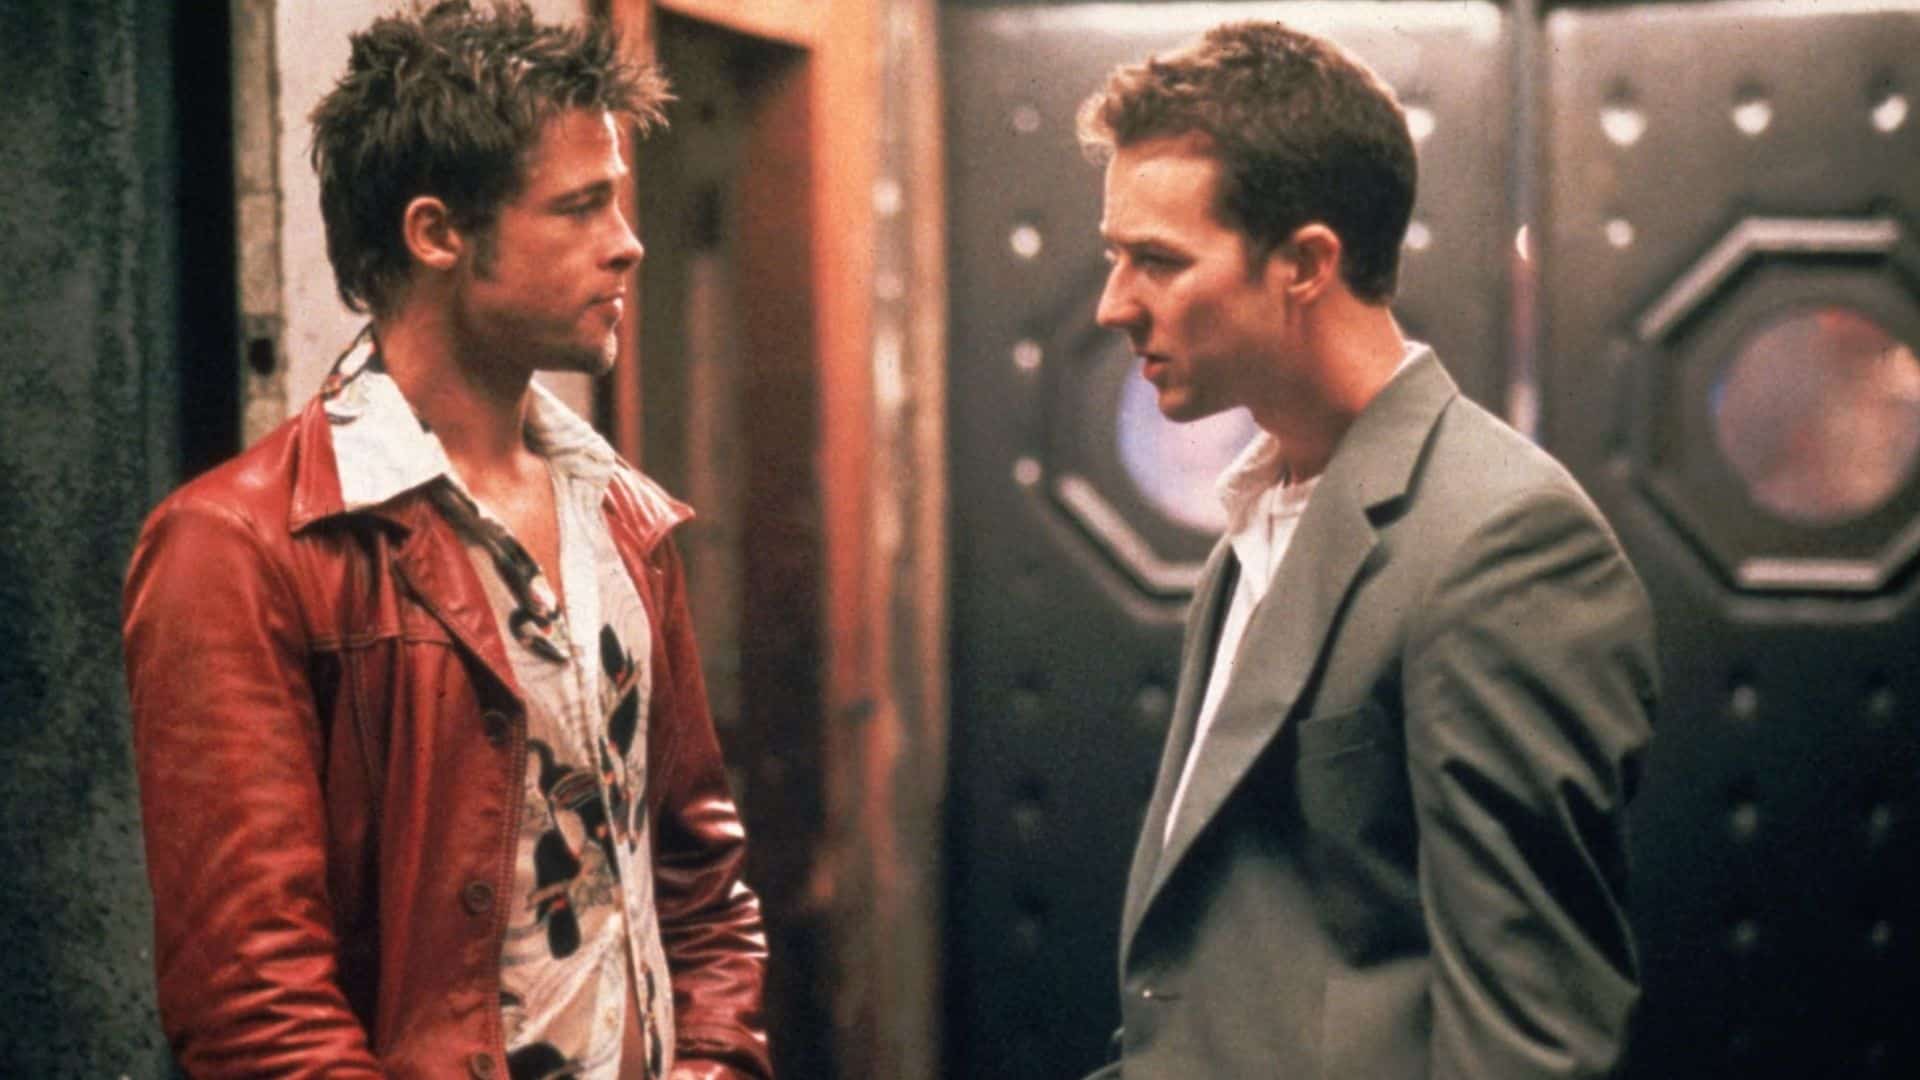 Tyler Durden and the Narrator in conversation in this image from 20th Century Studios.